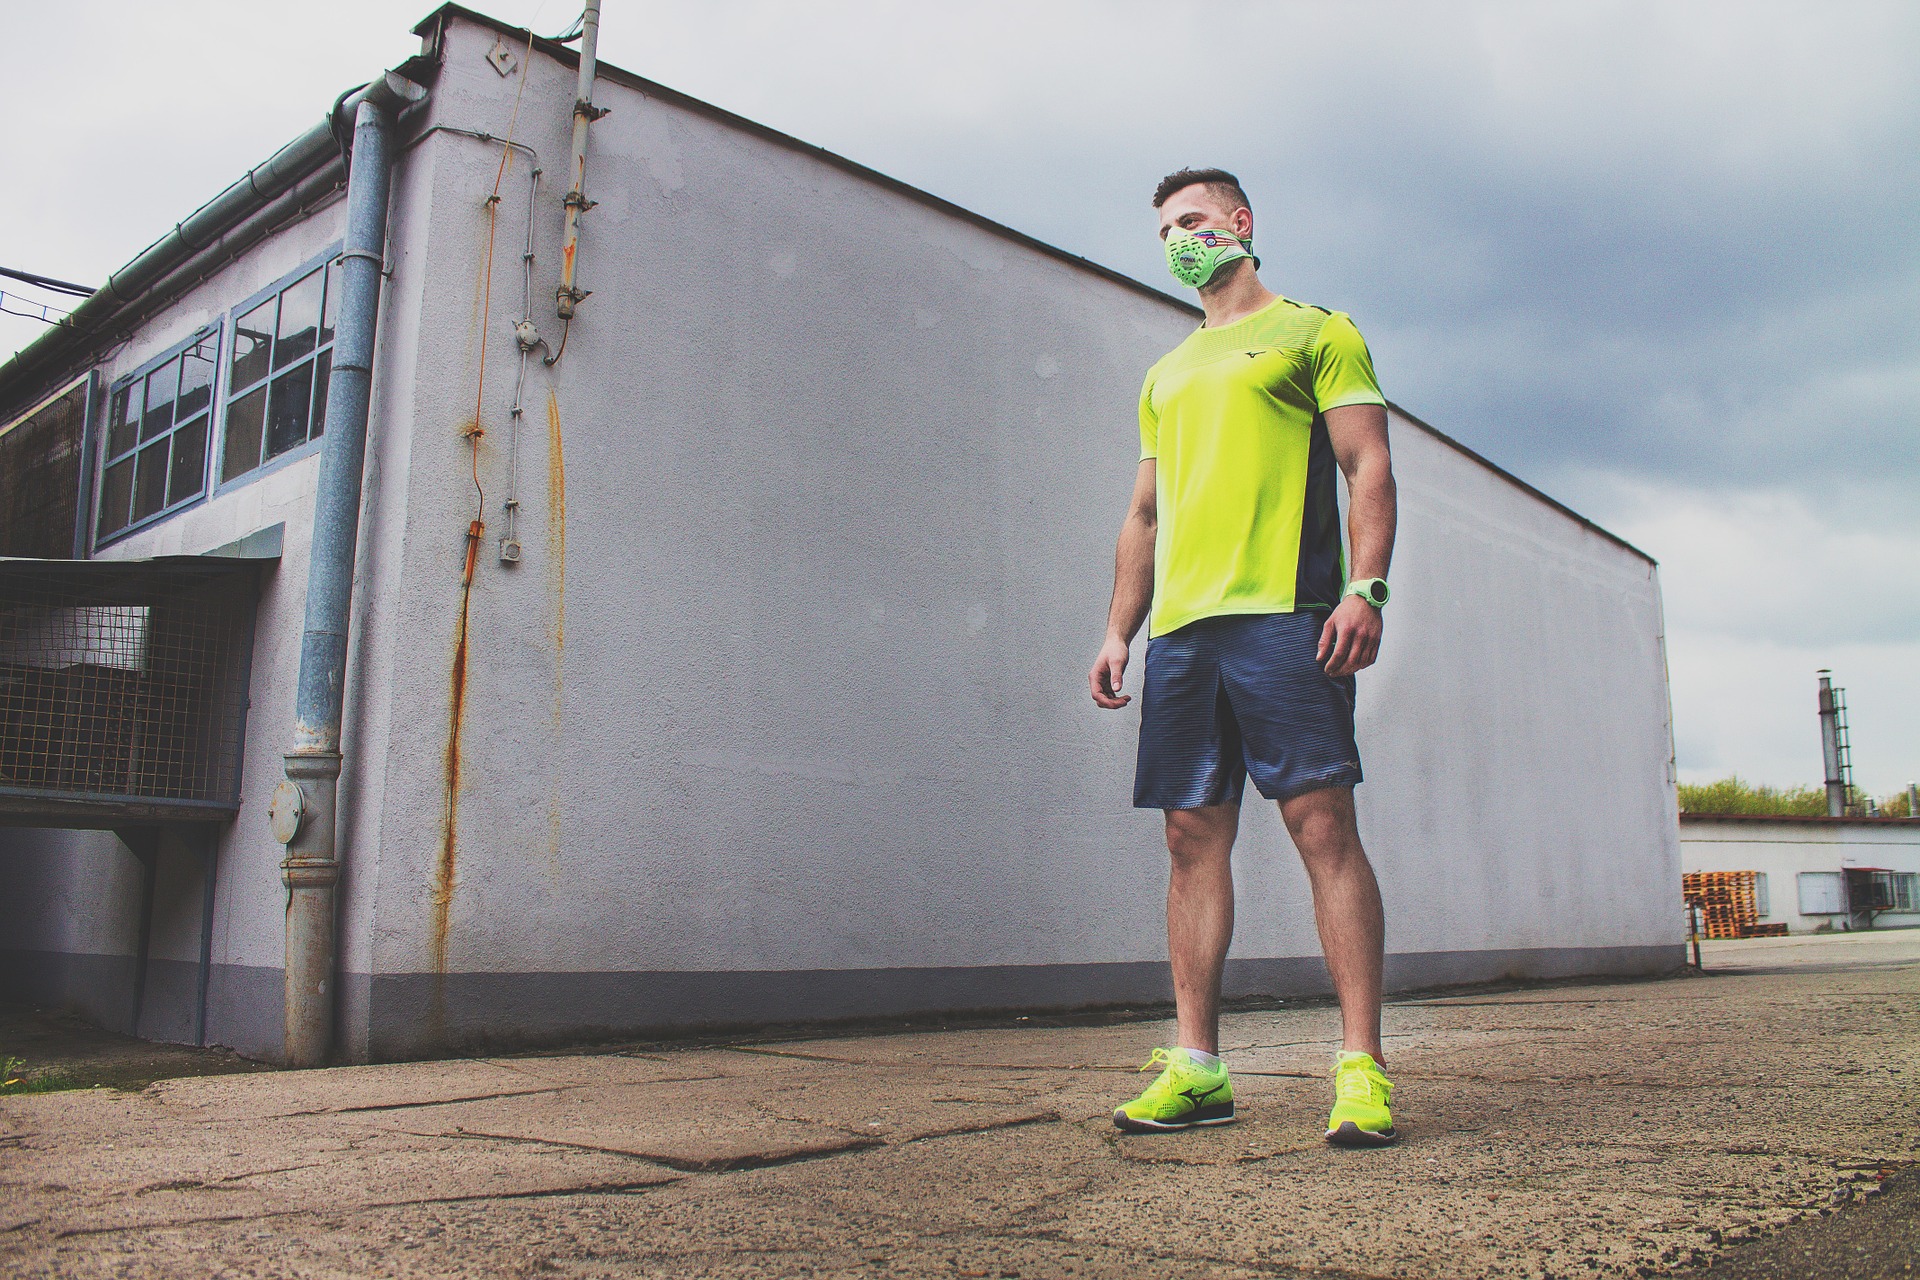 Exercising in the Polluted Air Might Not Be So Bad?